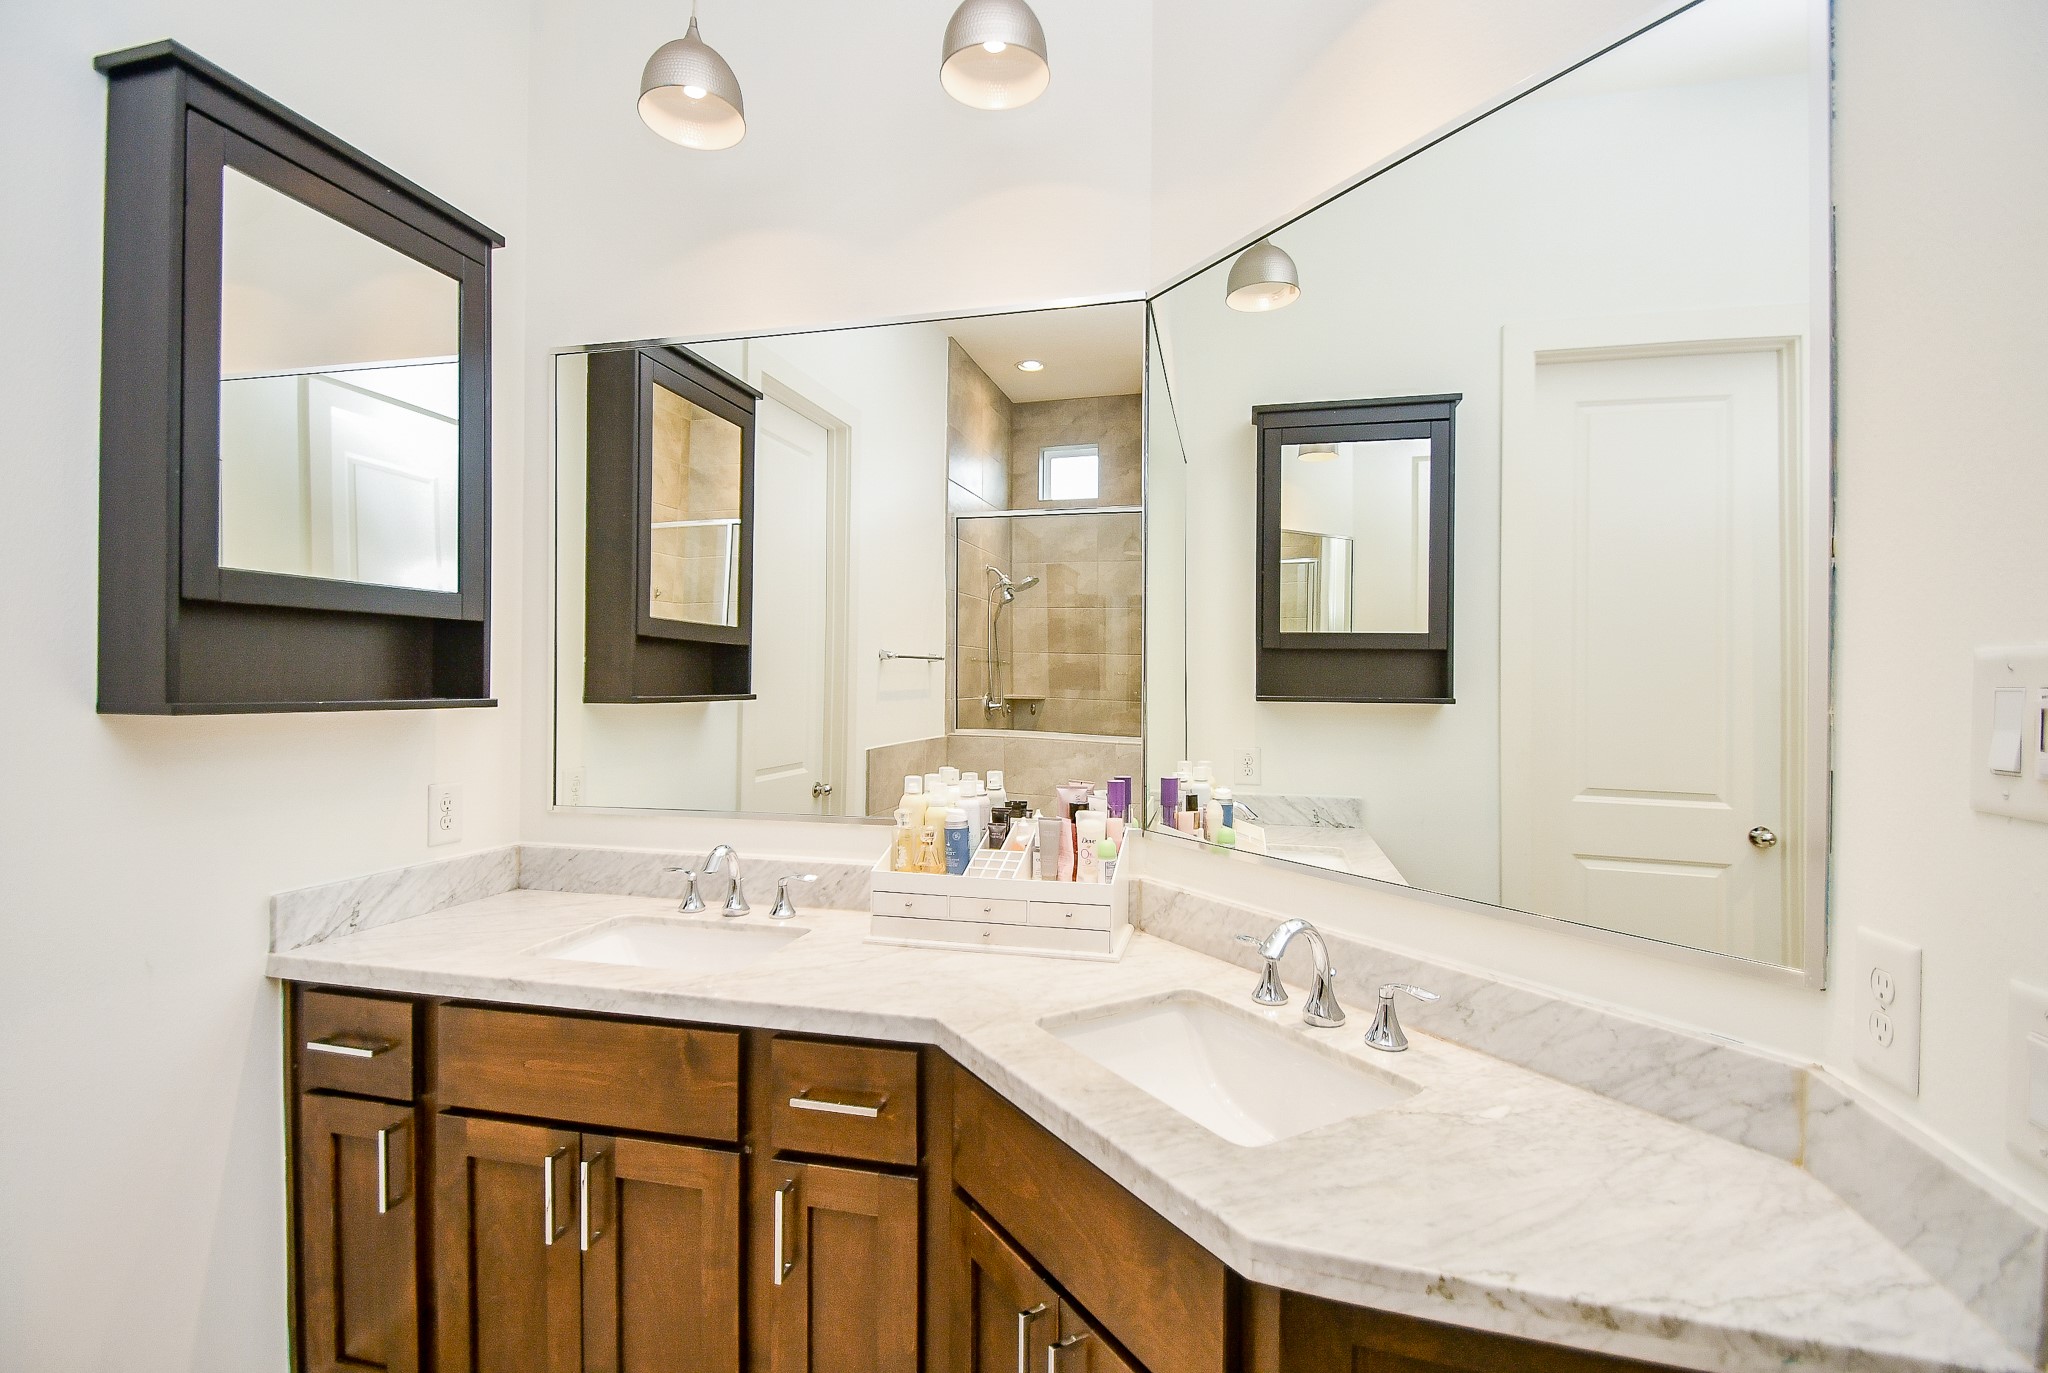 Primary bathroom features double sinks and beautiful finishes.